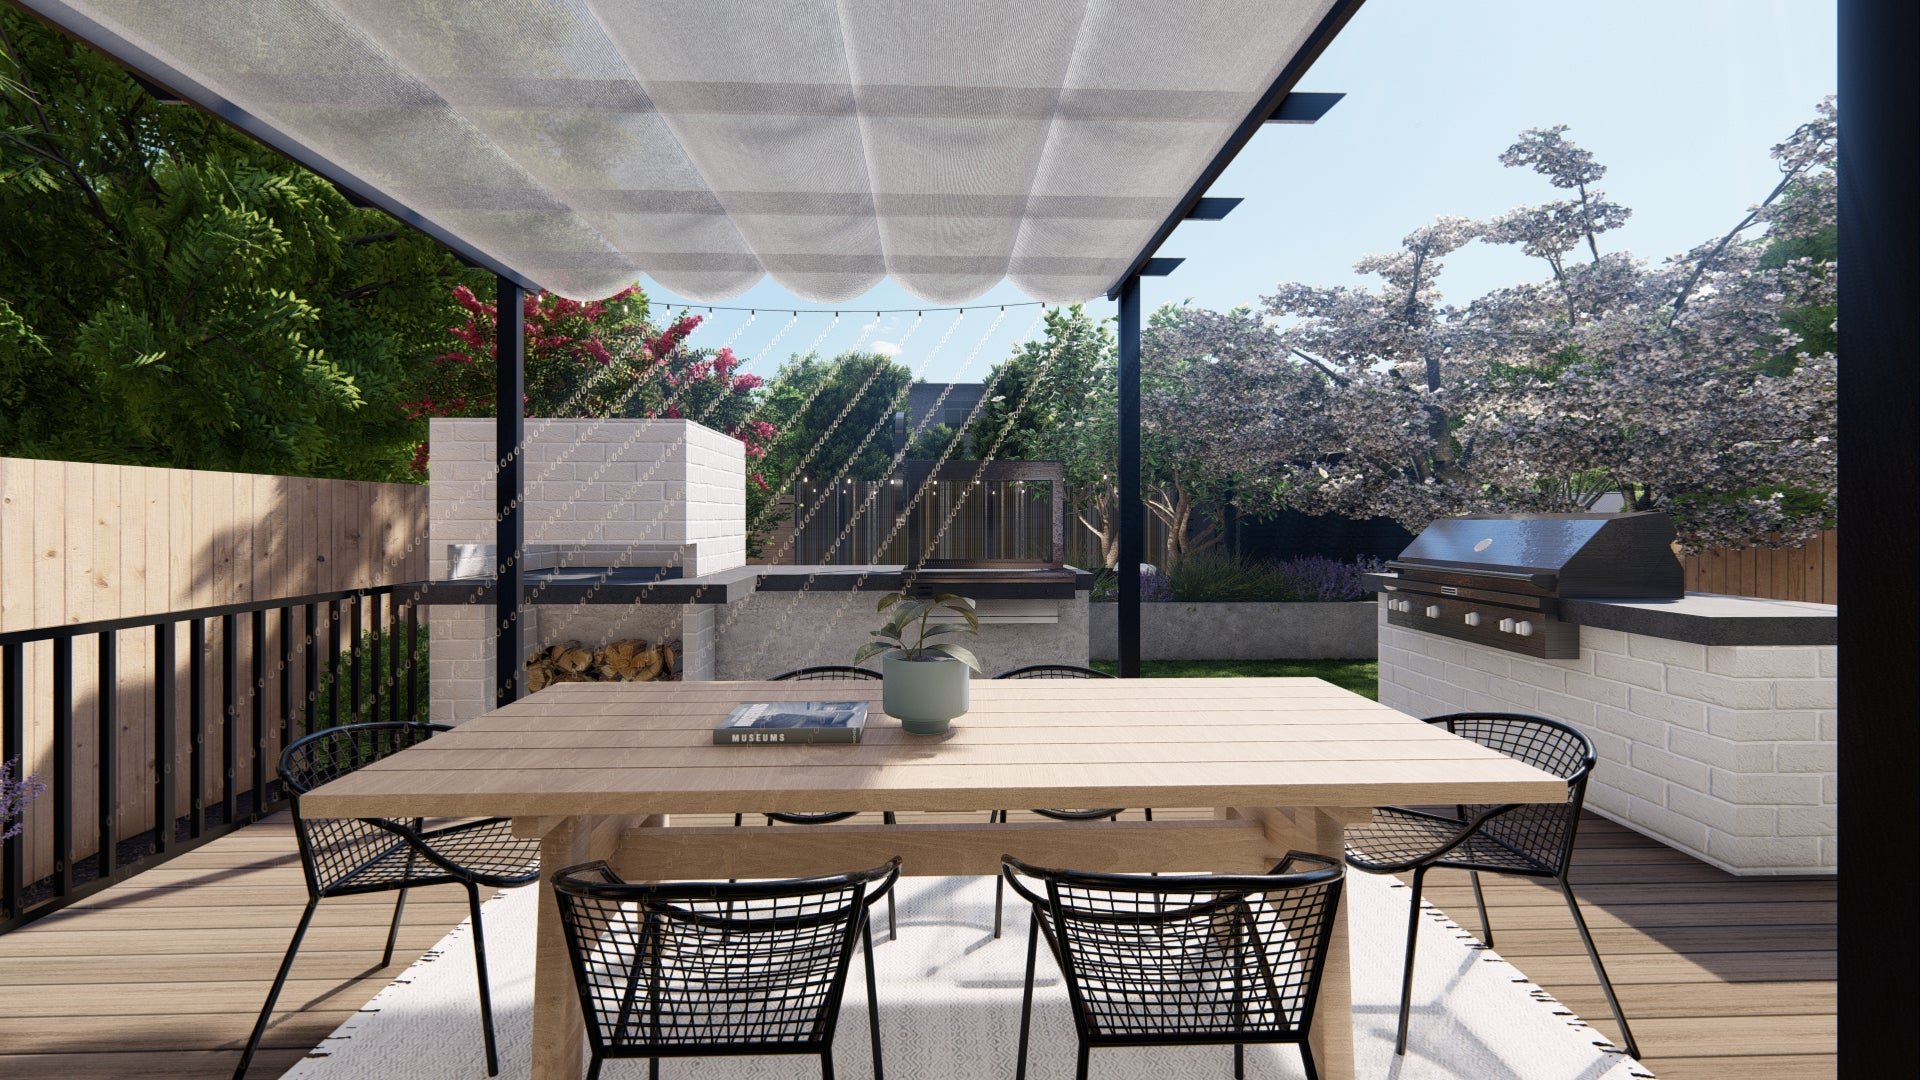 RH’s Merida teak dining table looks looks great paired with a white brick outdoor kitchen and black metal chairs in this backyard design for our client in Seattle, WA.